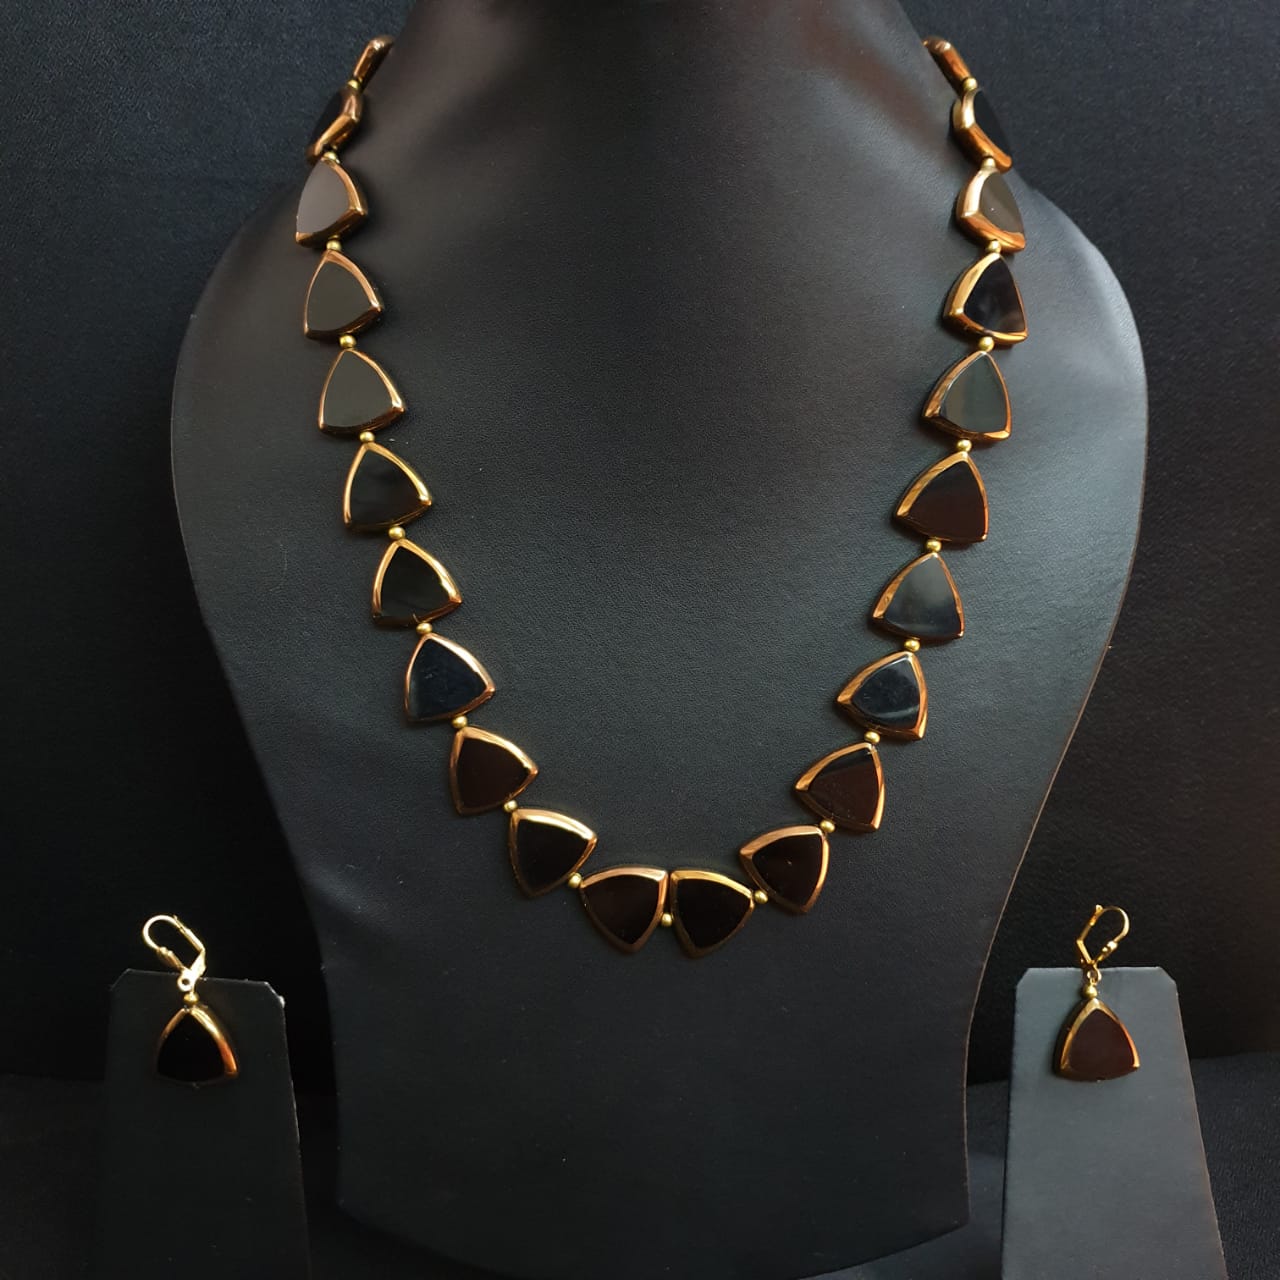 Black Color Triangle Shape Necklace With Earrings